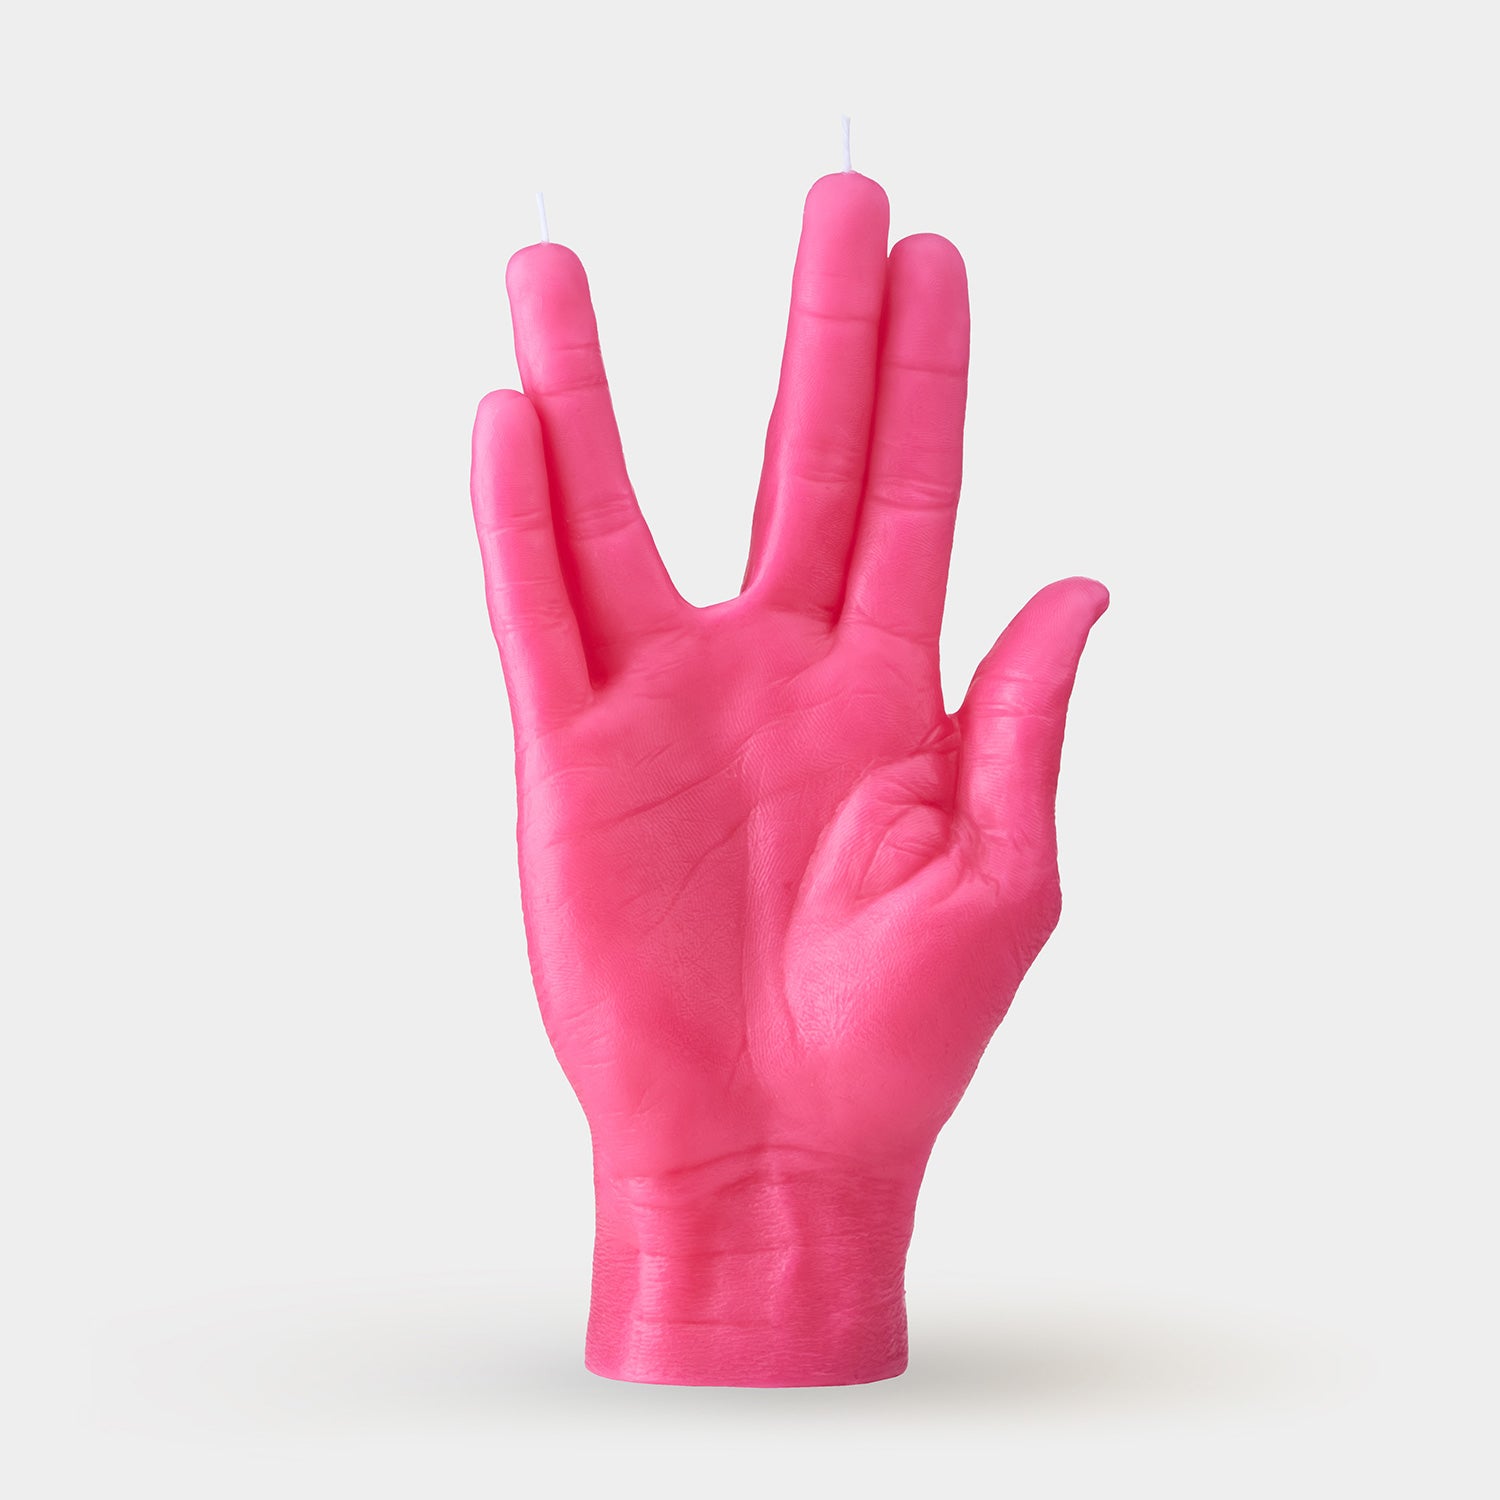 CandleHand "LLAP" Candle - Pink